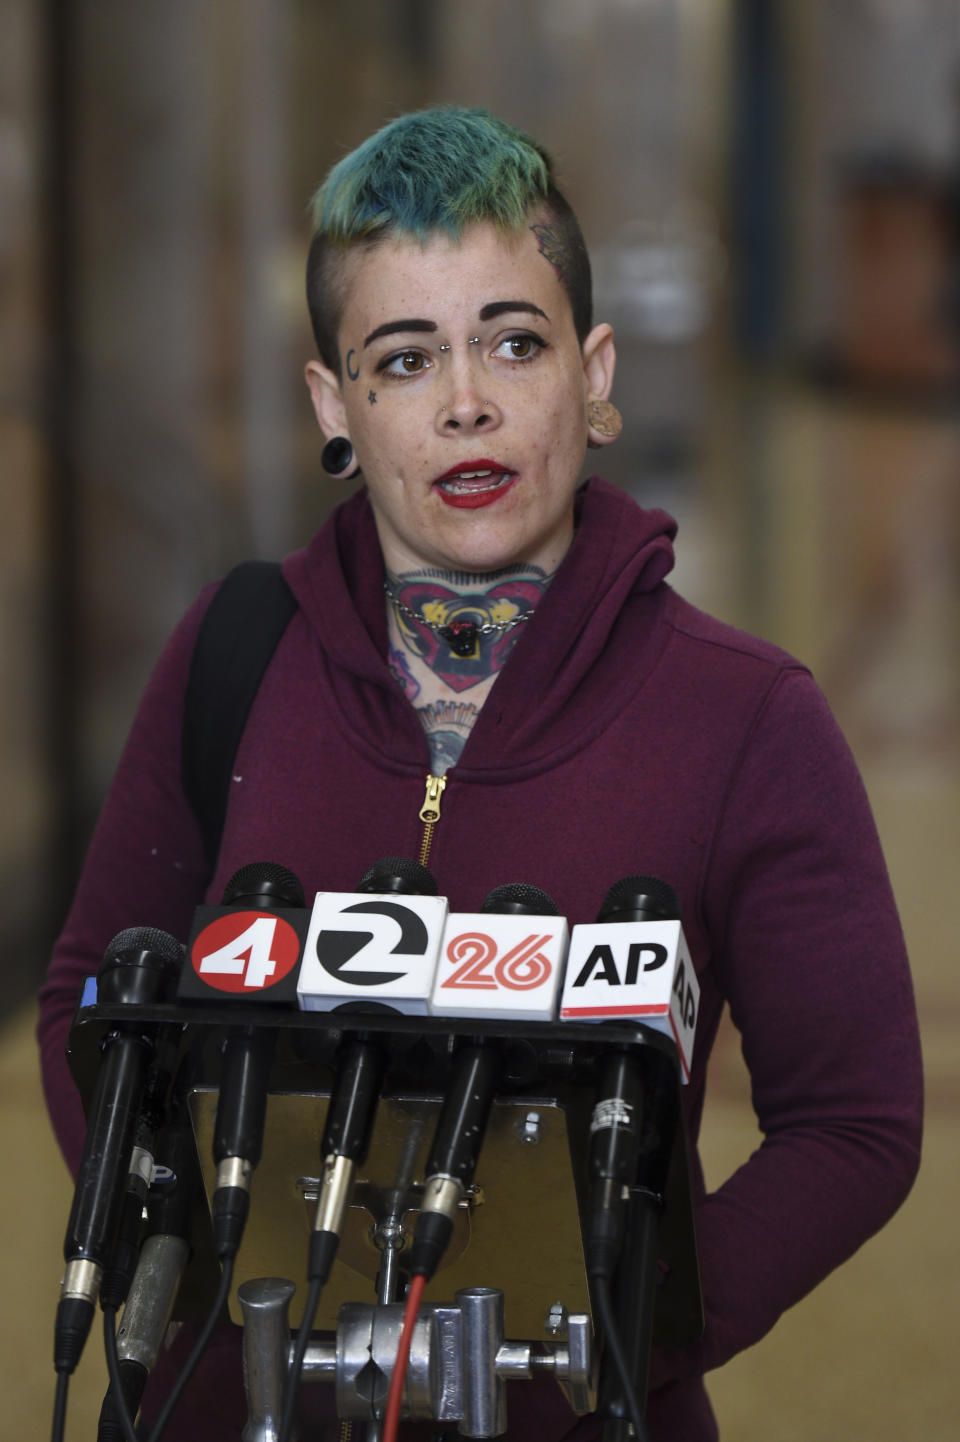 Danielle Silva, of Oakland, Calif., who identified herself as a Max Harris supporter, speaks to the media at the Alameda County Courthouse in Oakland, Calif., Tuesday April, 30, 2019. Two defendants, Derick Almena and Max Harris are standing trial on charges of involuntary manslaughter after a 2016 fire killed 36 people at a warehouse party they hosted in Oakland. (AP Photo/Cody Glenn)